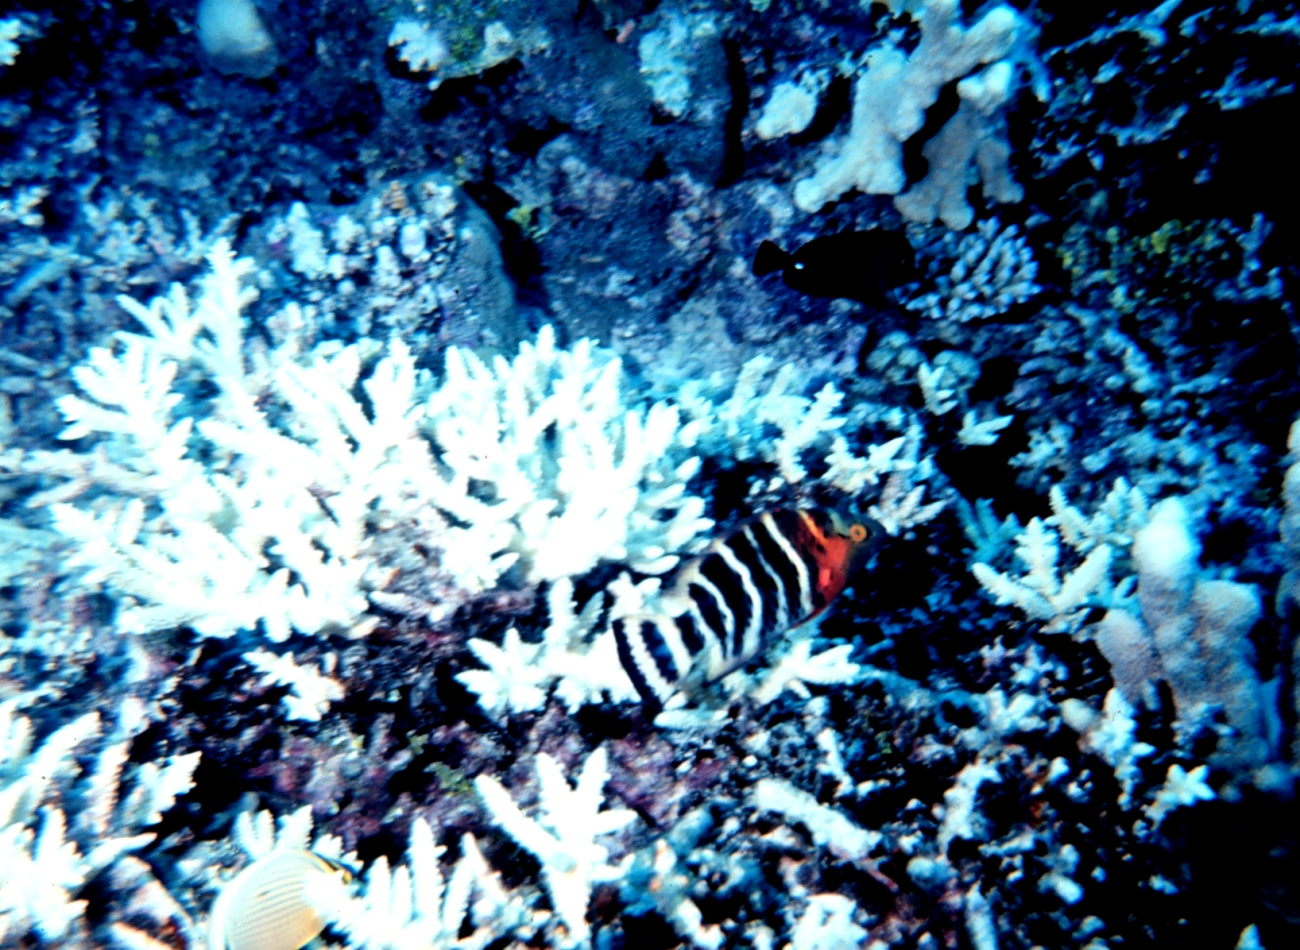 Red breasted wrasse (Cheilinus fasciatus) amongst coral